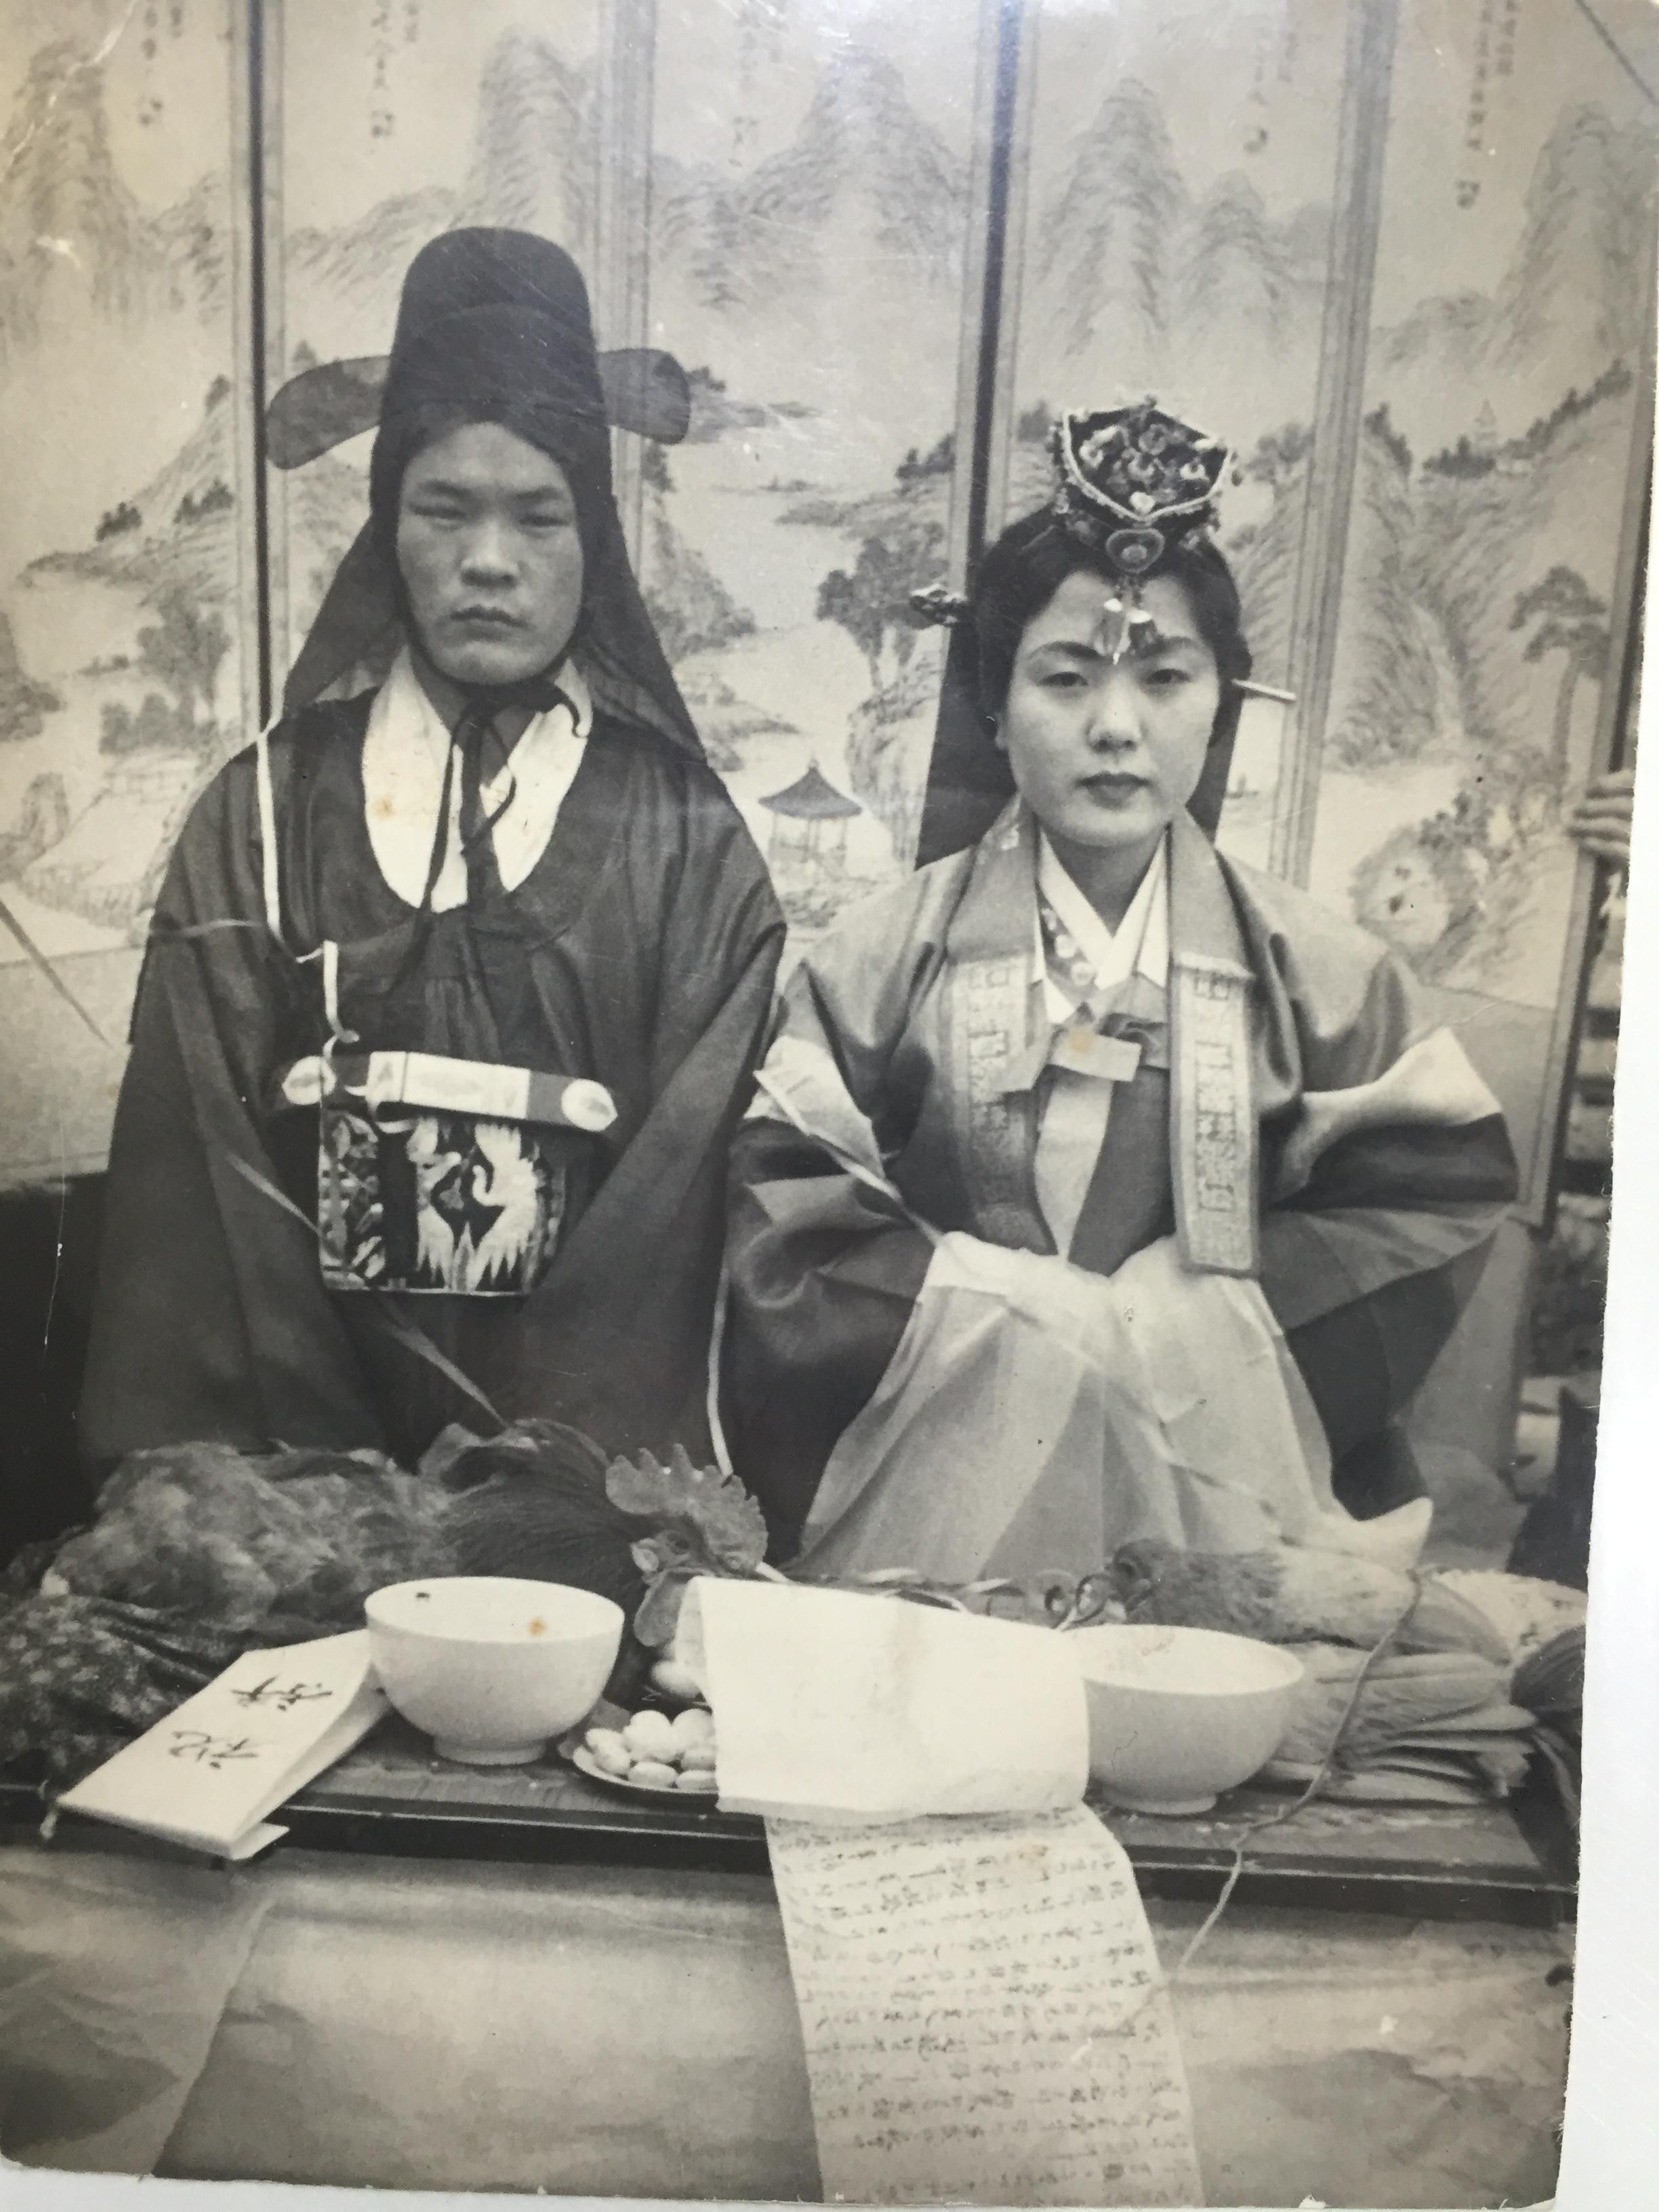 My Korean Grandparents at their traditional wedding. 1950's